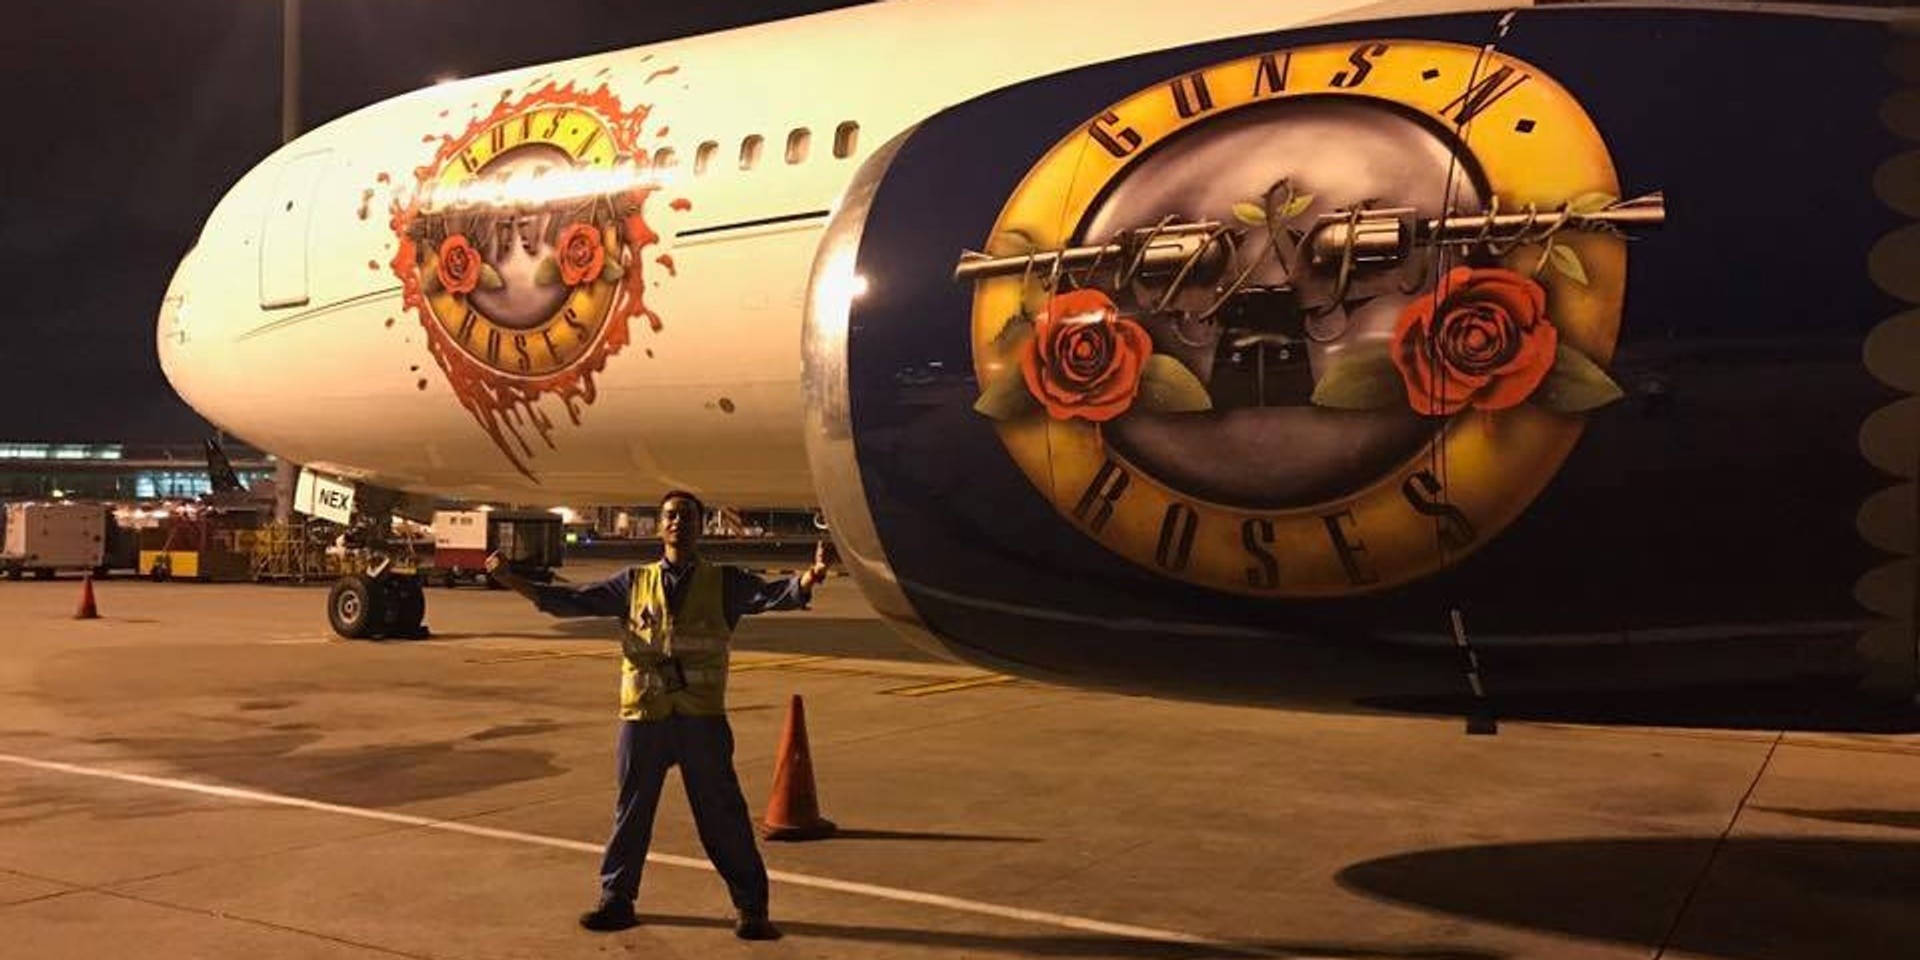 One lucky Changi Airport employee got a close-up look at the private jet of Guns N' Roses 